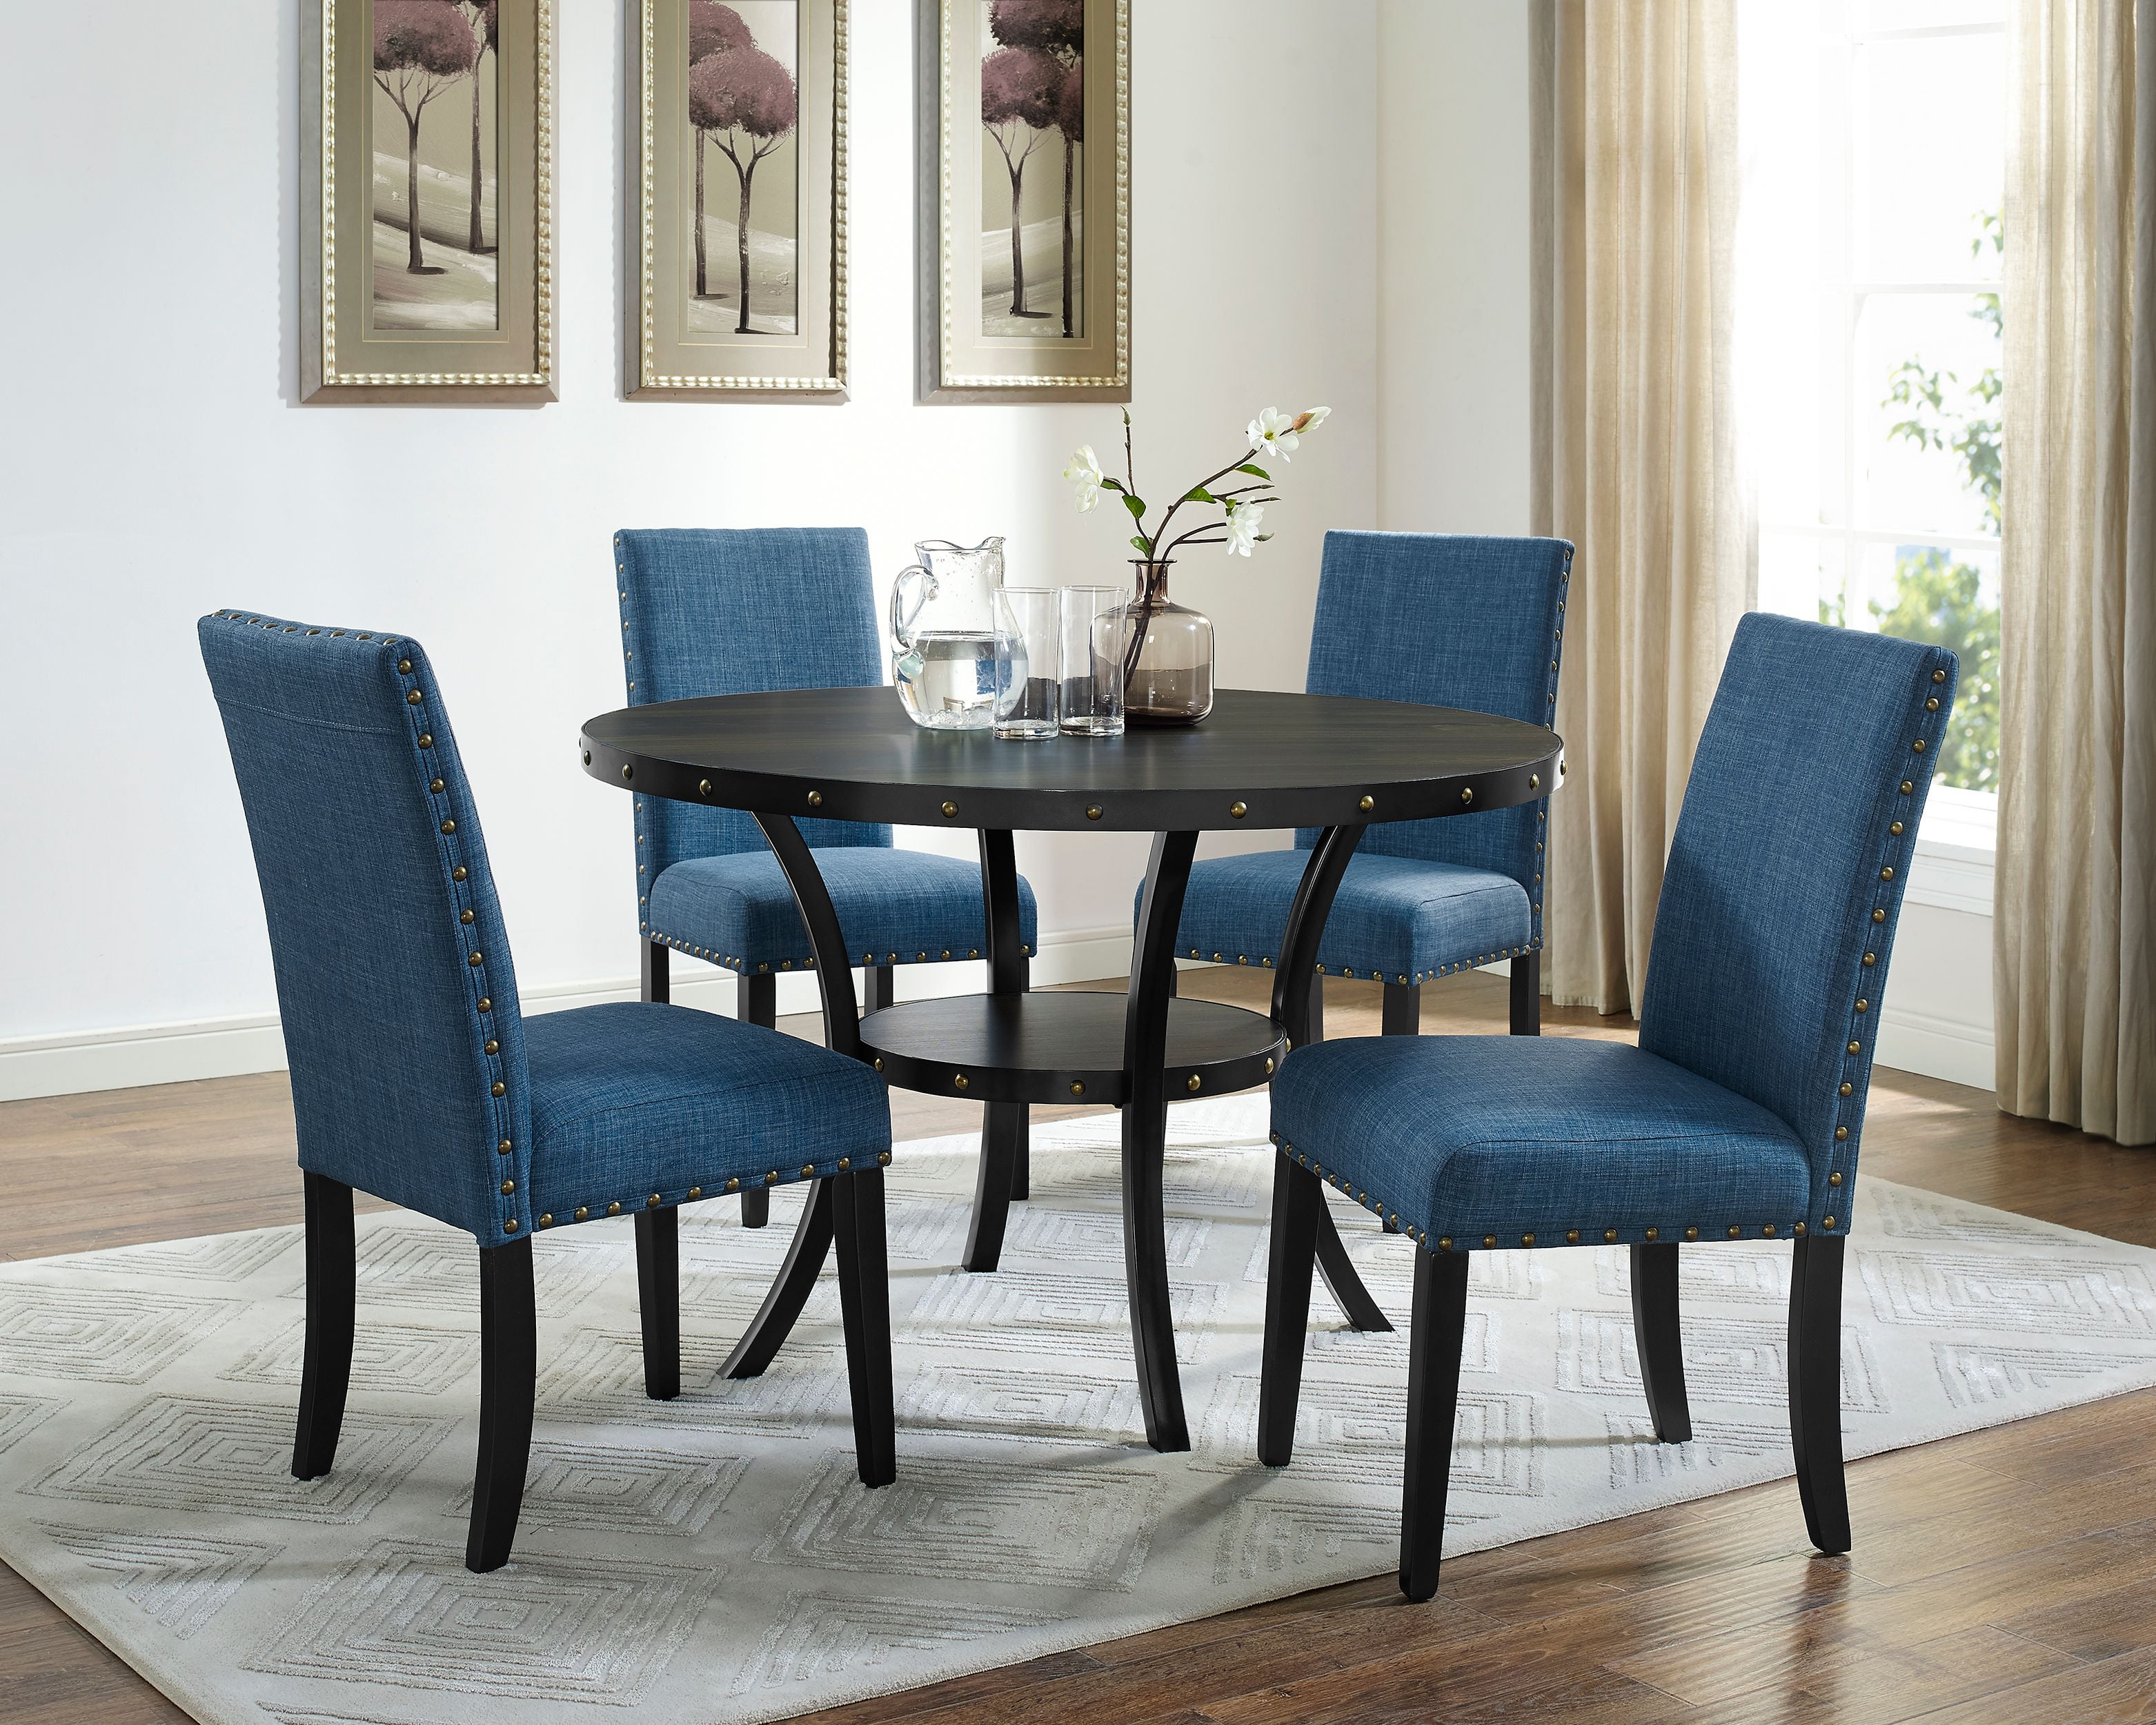 Light Blue Fabric Dining Room Chairs